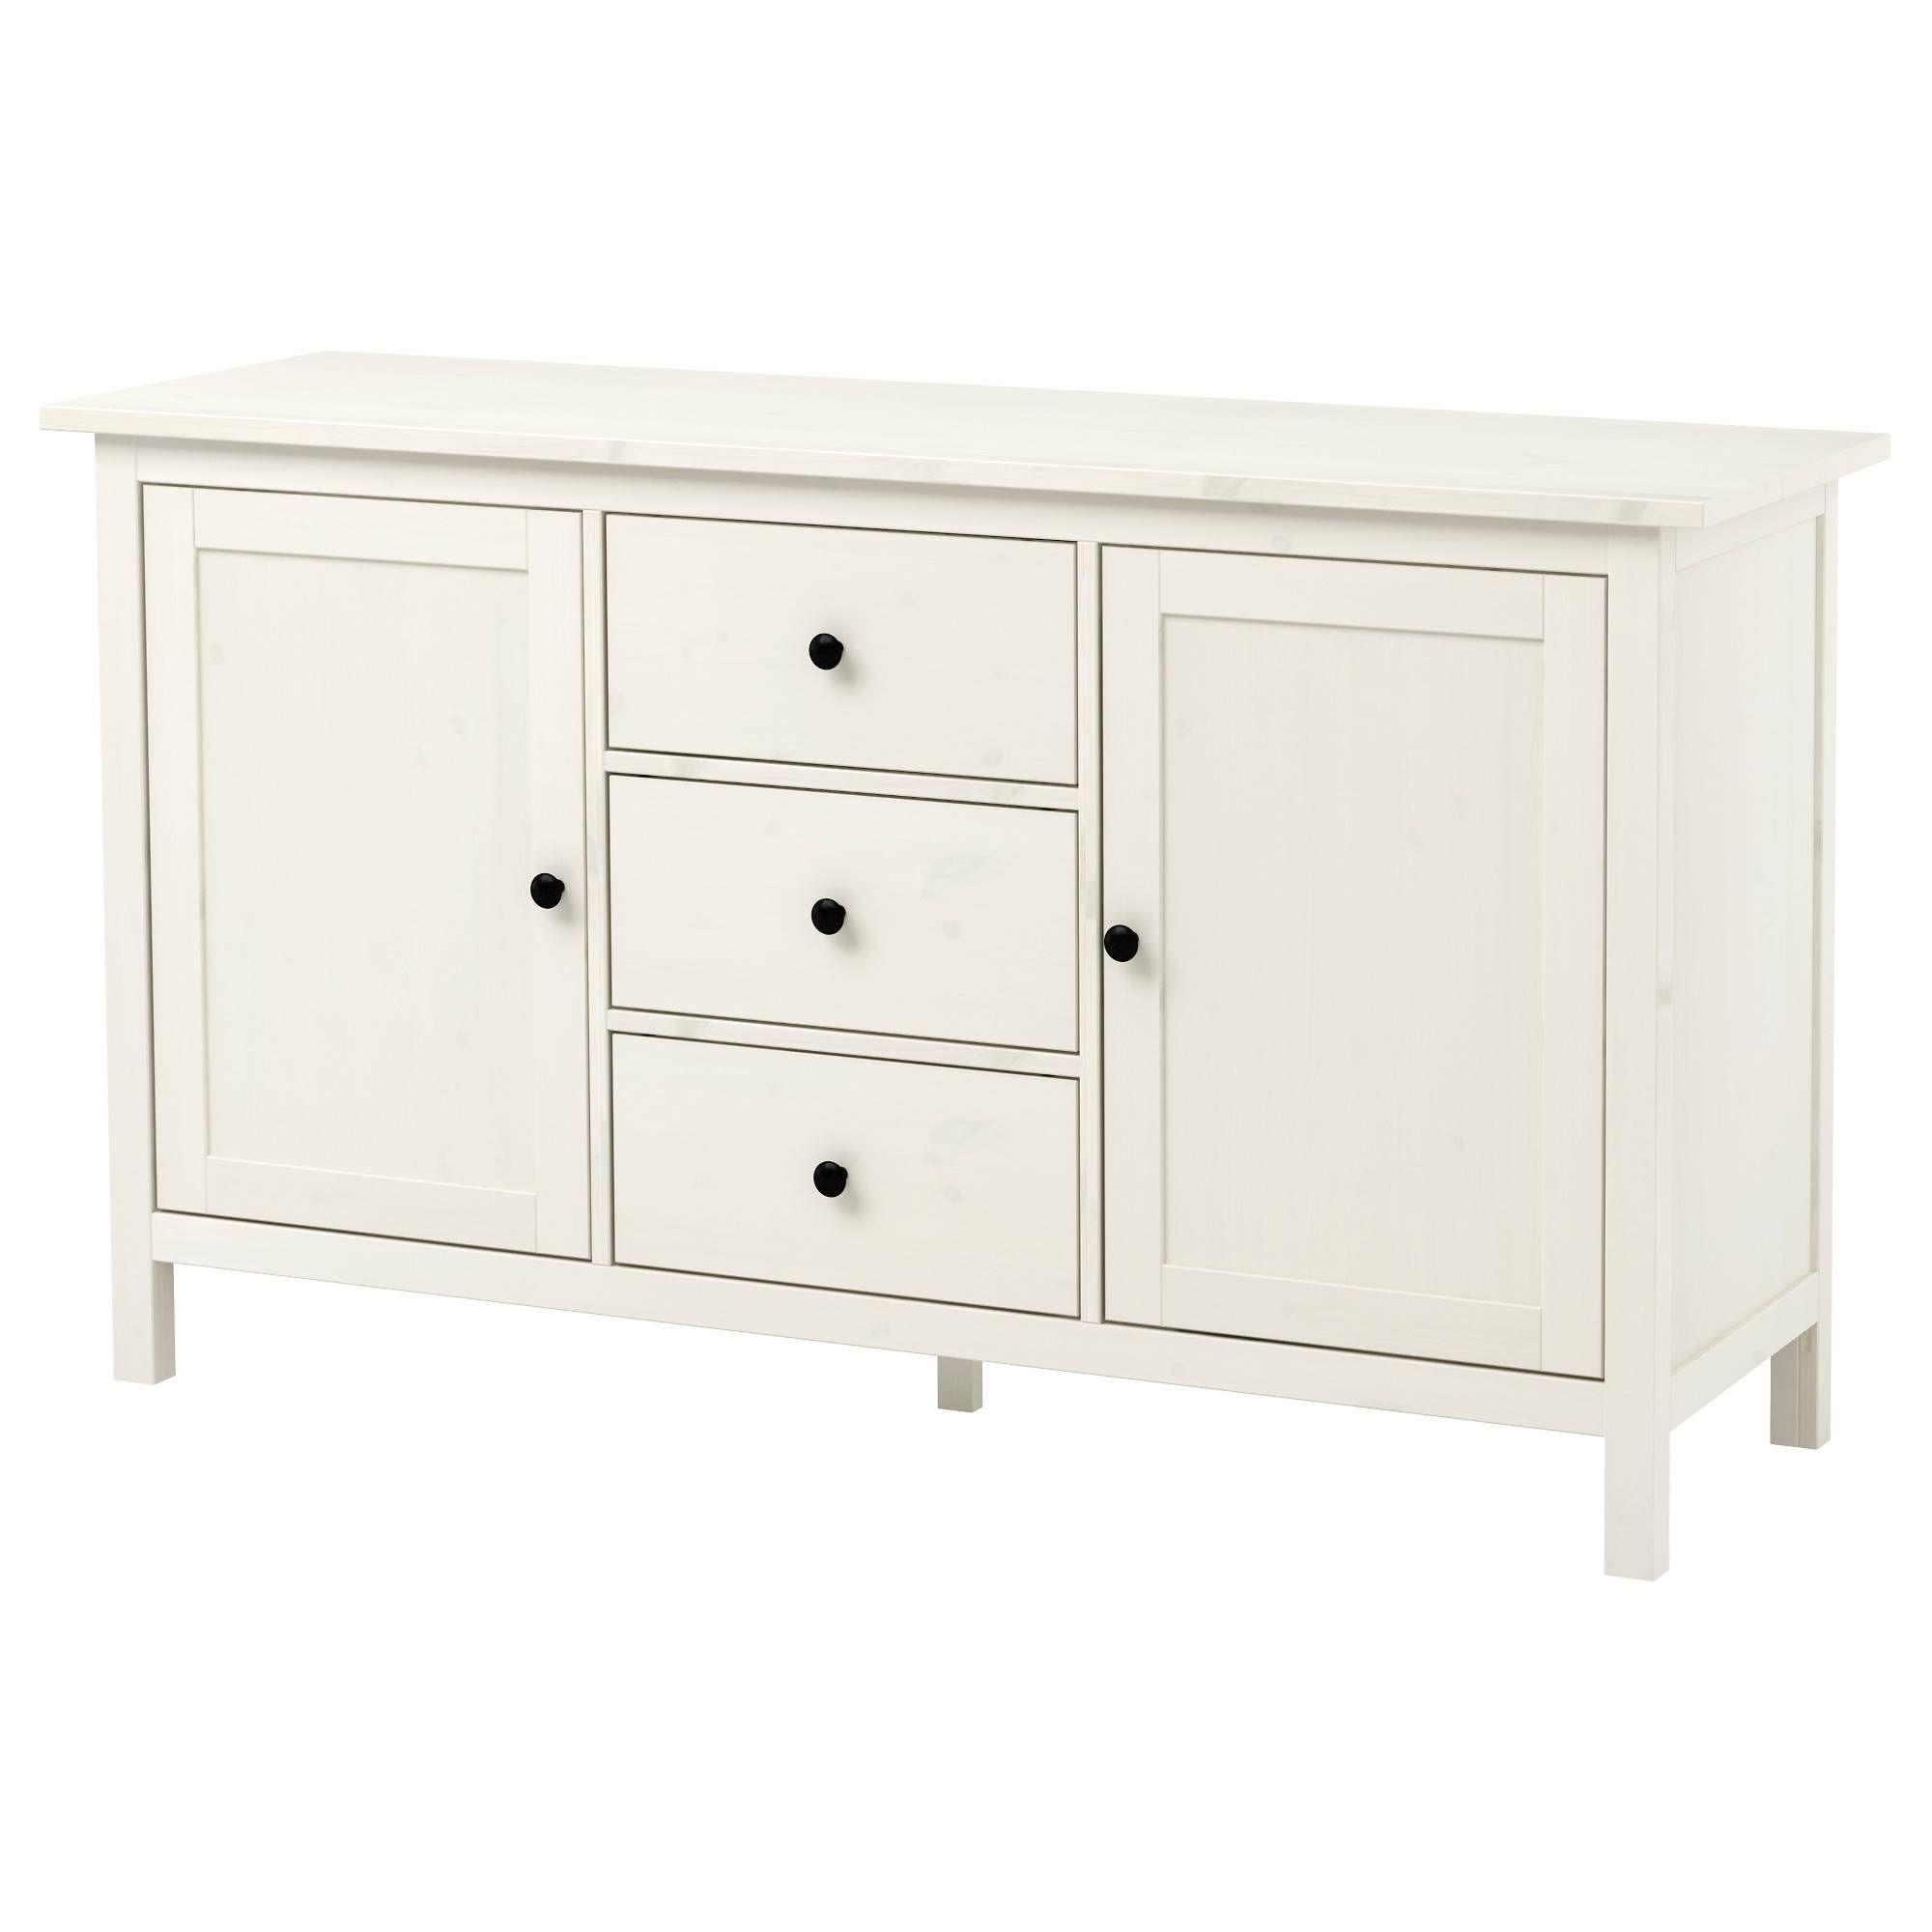 Hemnes Sideboard White Stain 157x88 Cm – Ikea For White Gloss Ikea Sideboards (View 5 of 15)